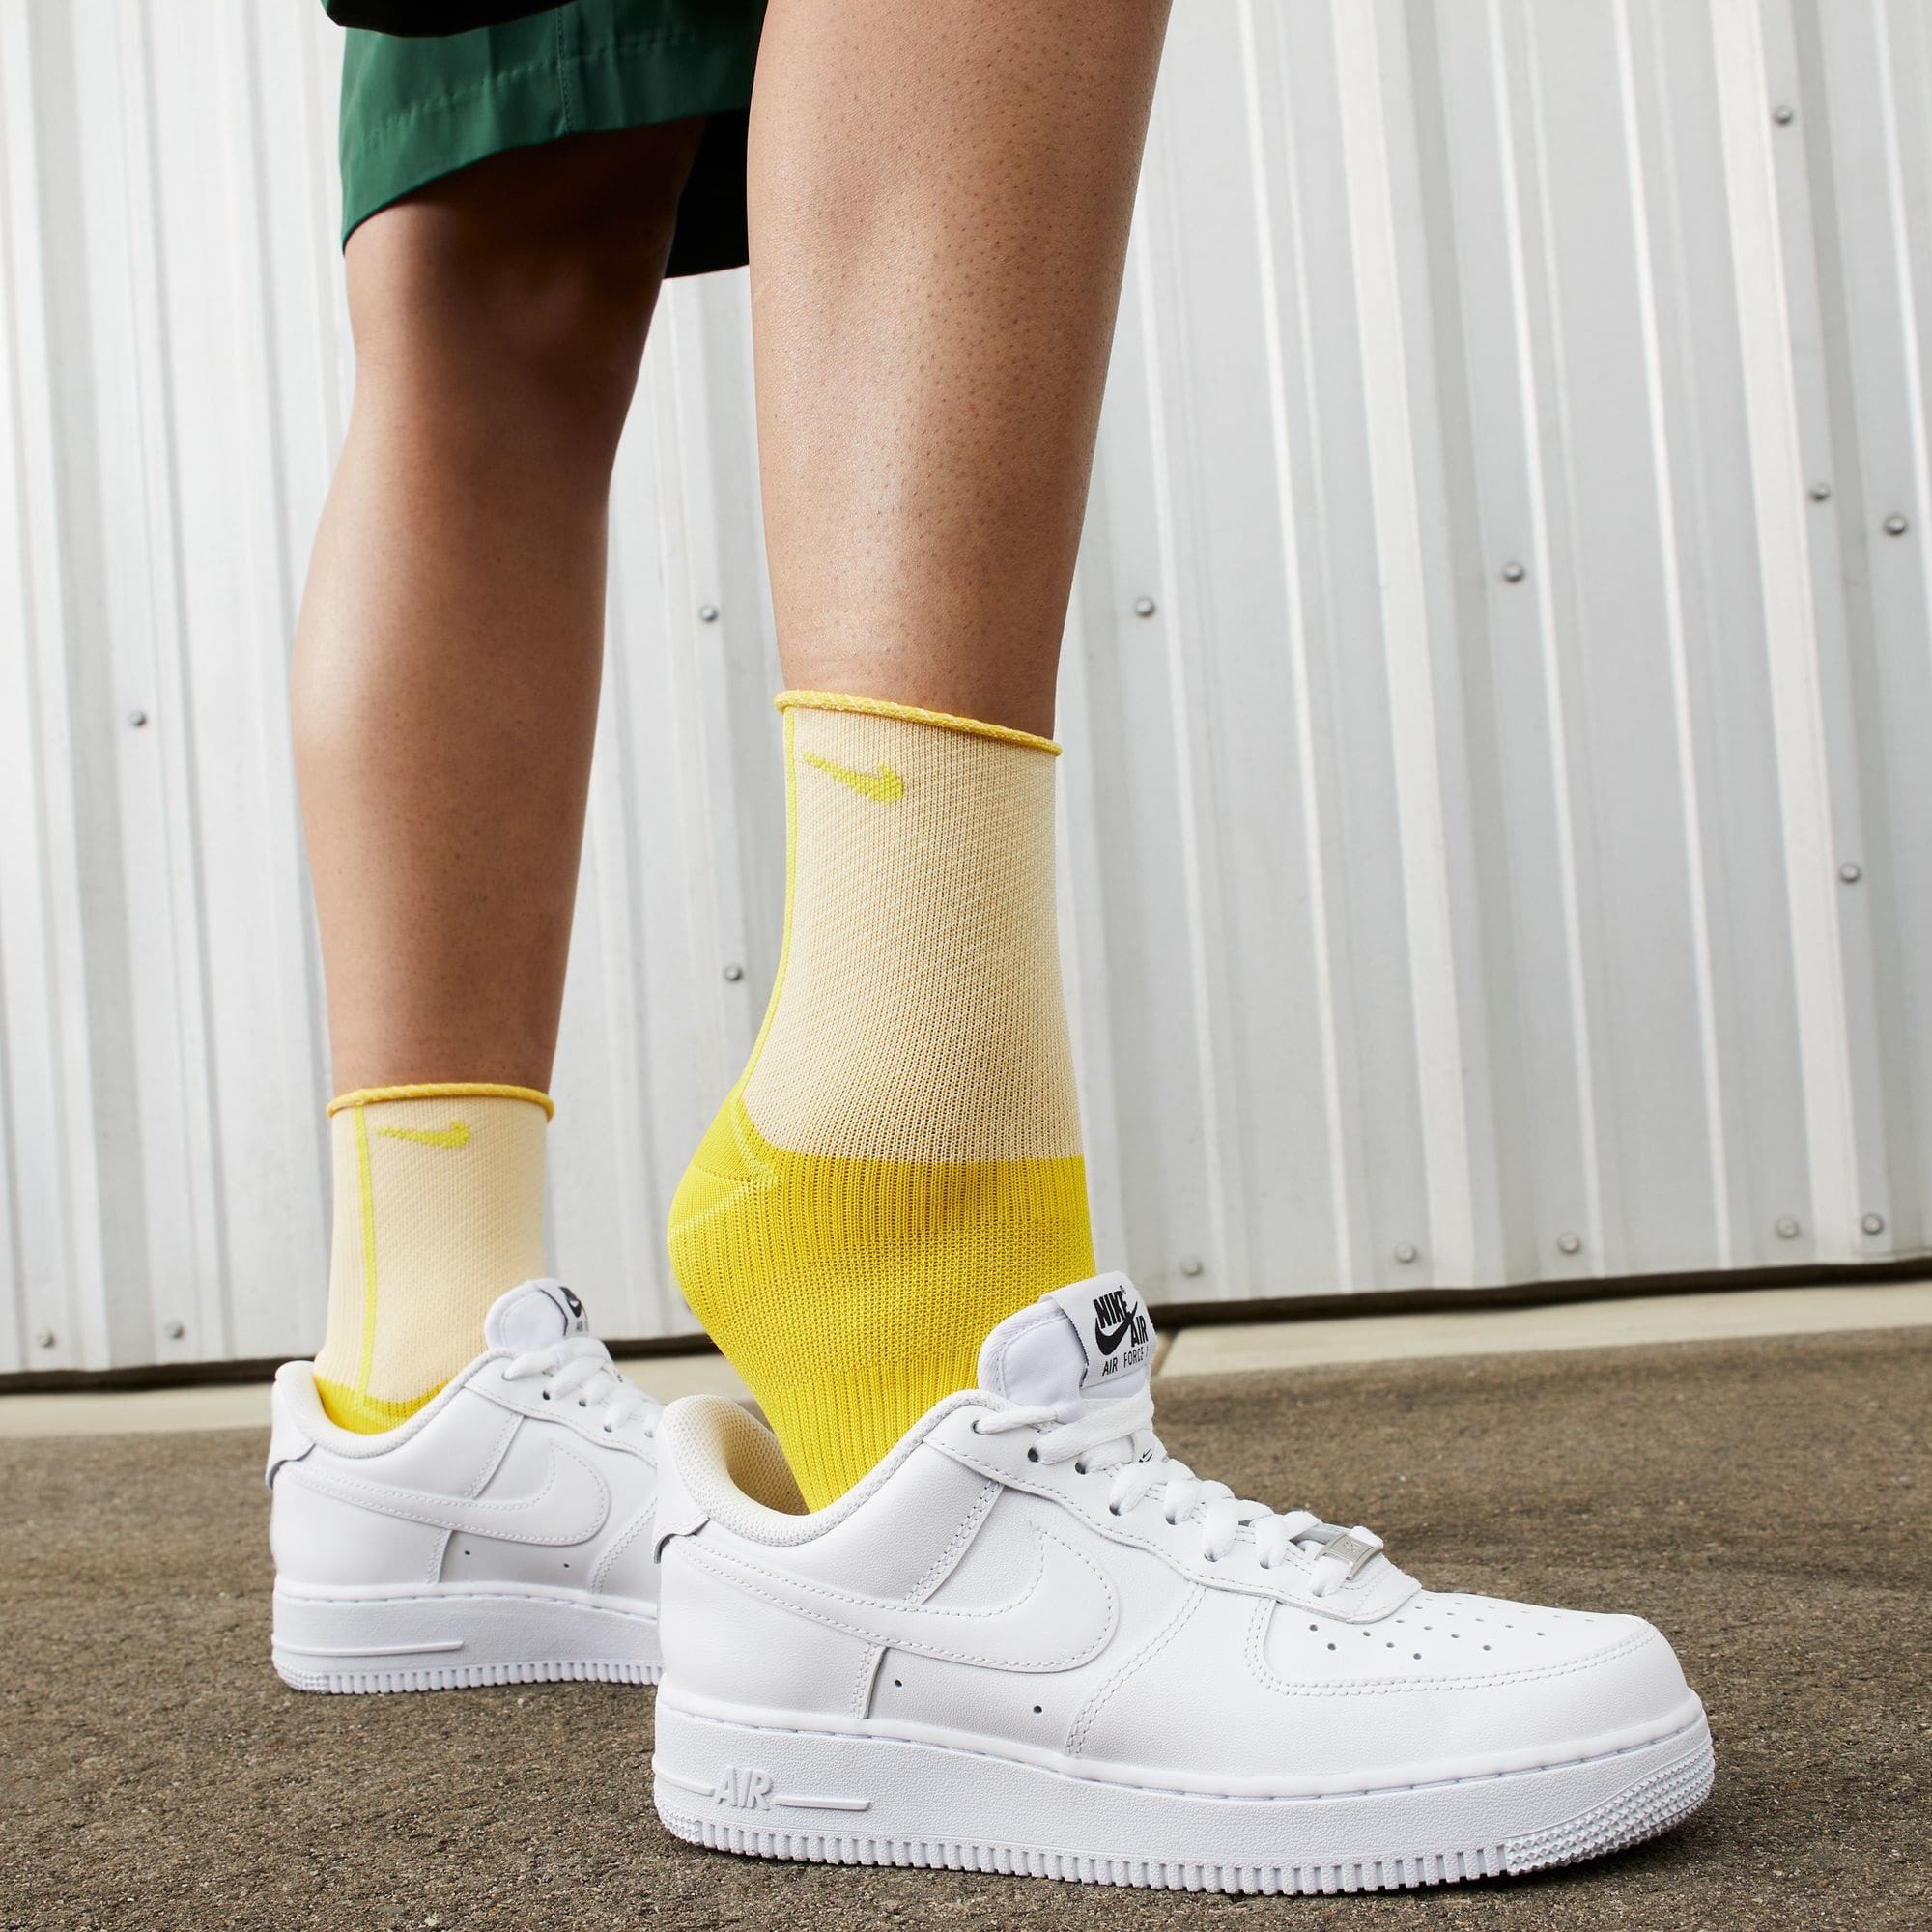 GIÀY THỂ THAO NỮ NIKE AIR FORCE 1 07 EASYON WHITE WOMENS SHOES DX5883-100 3